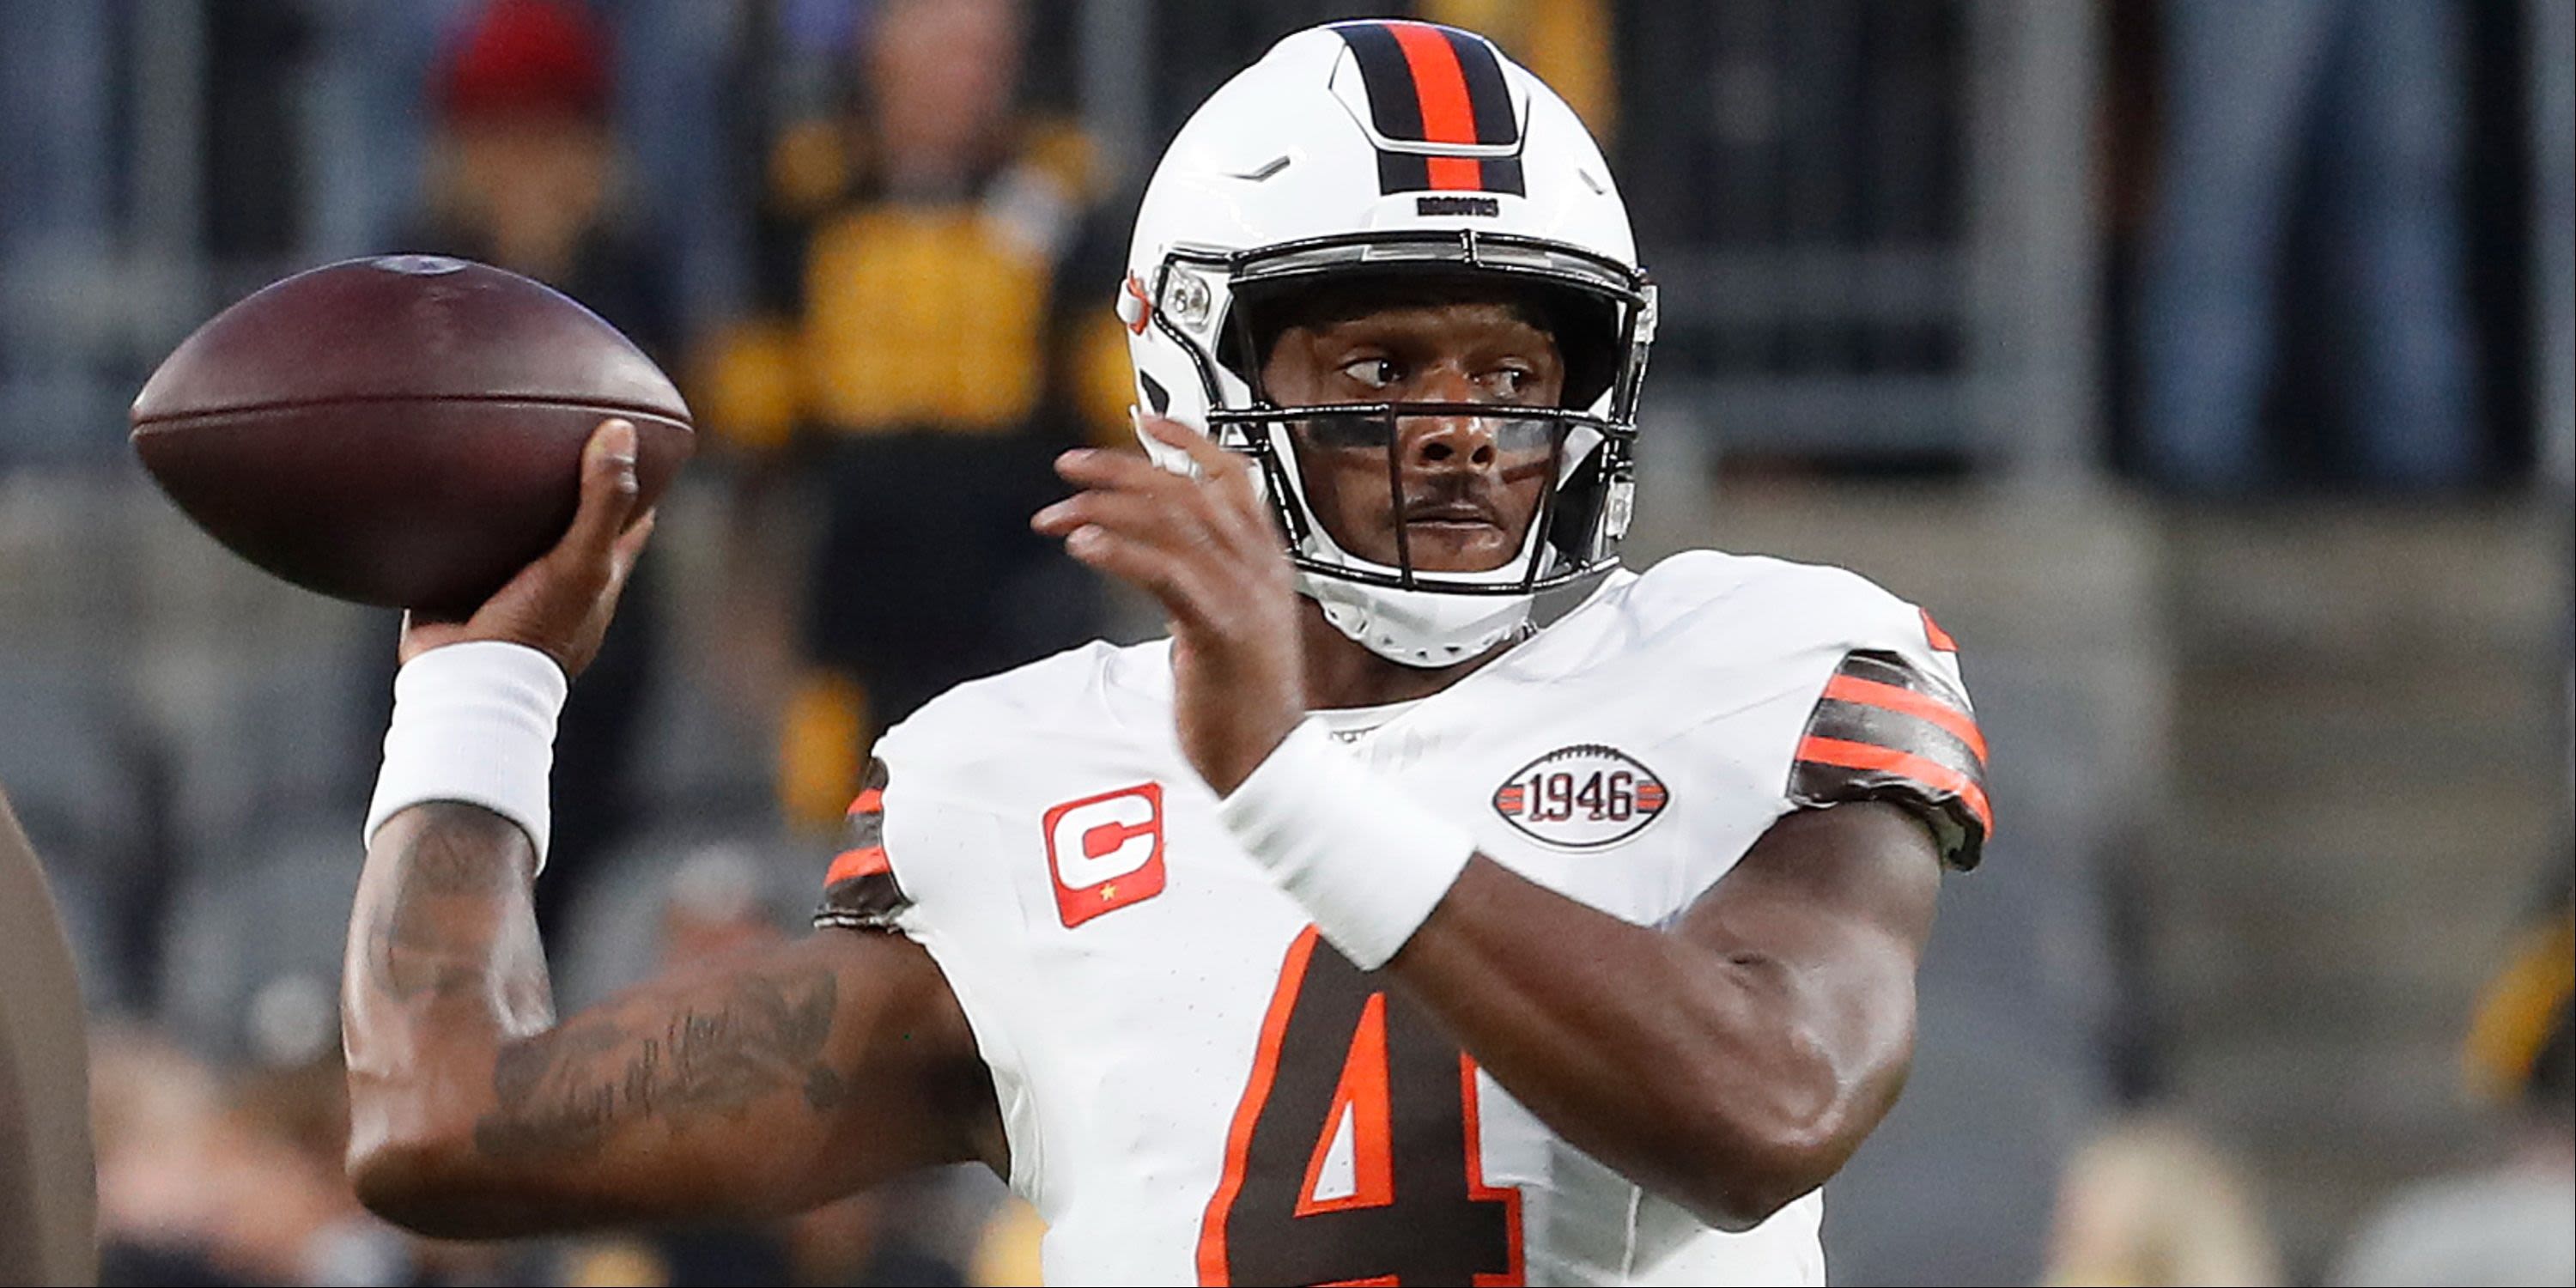 Browns GM Expecting A "Big Year" For Deshaun Watson And Cleveland Offense